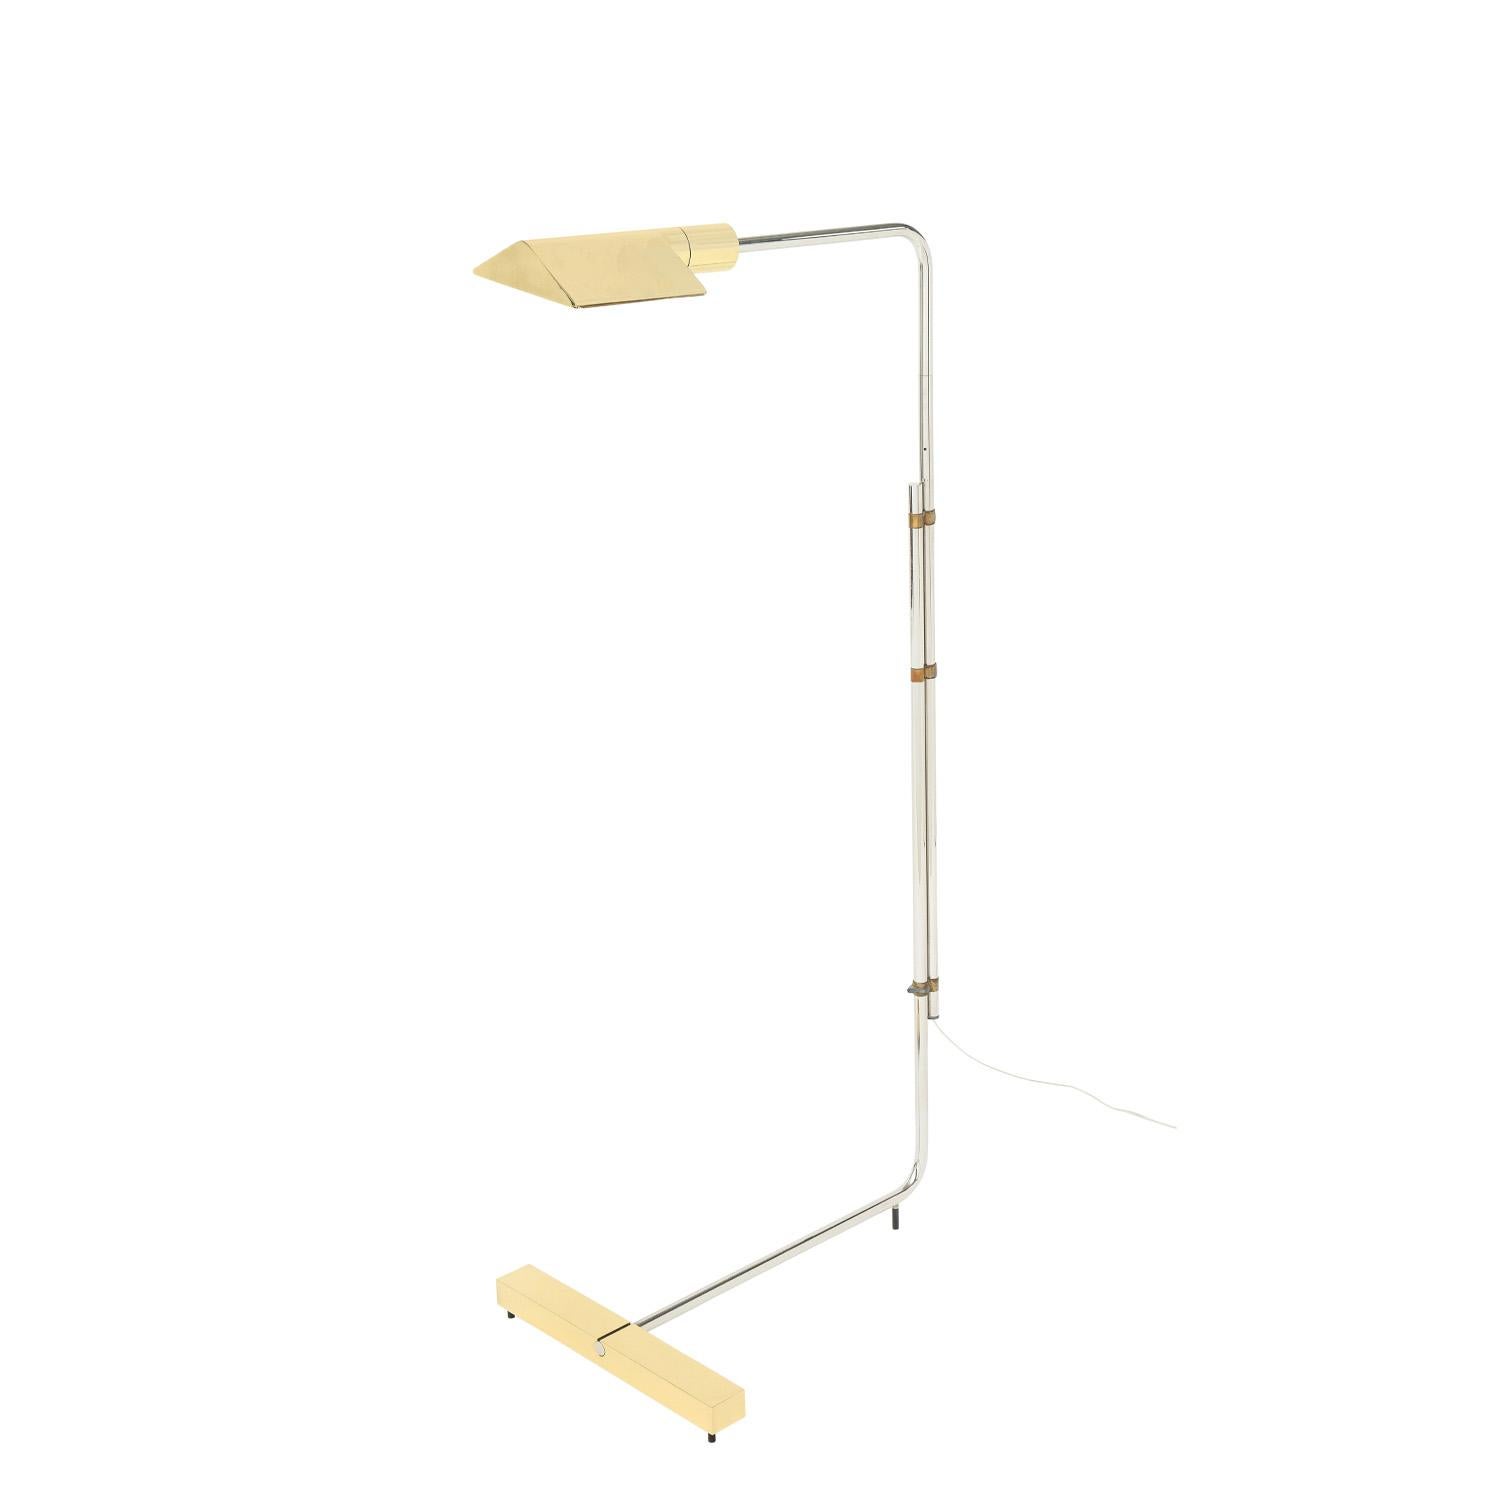 Iconic reading lamp in polished chrome and brass with lucite light switch by Cedric Hartman, American 1980's (signed on bottom “Cedric Hartman”). This lamp has been completely restored - professionally cleaned, polished and rewired.

Height as